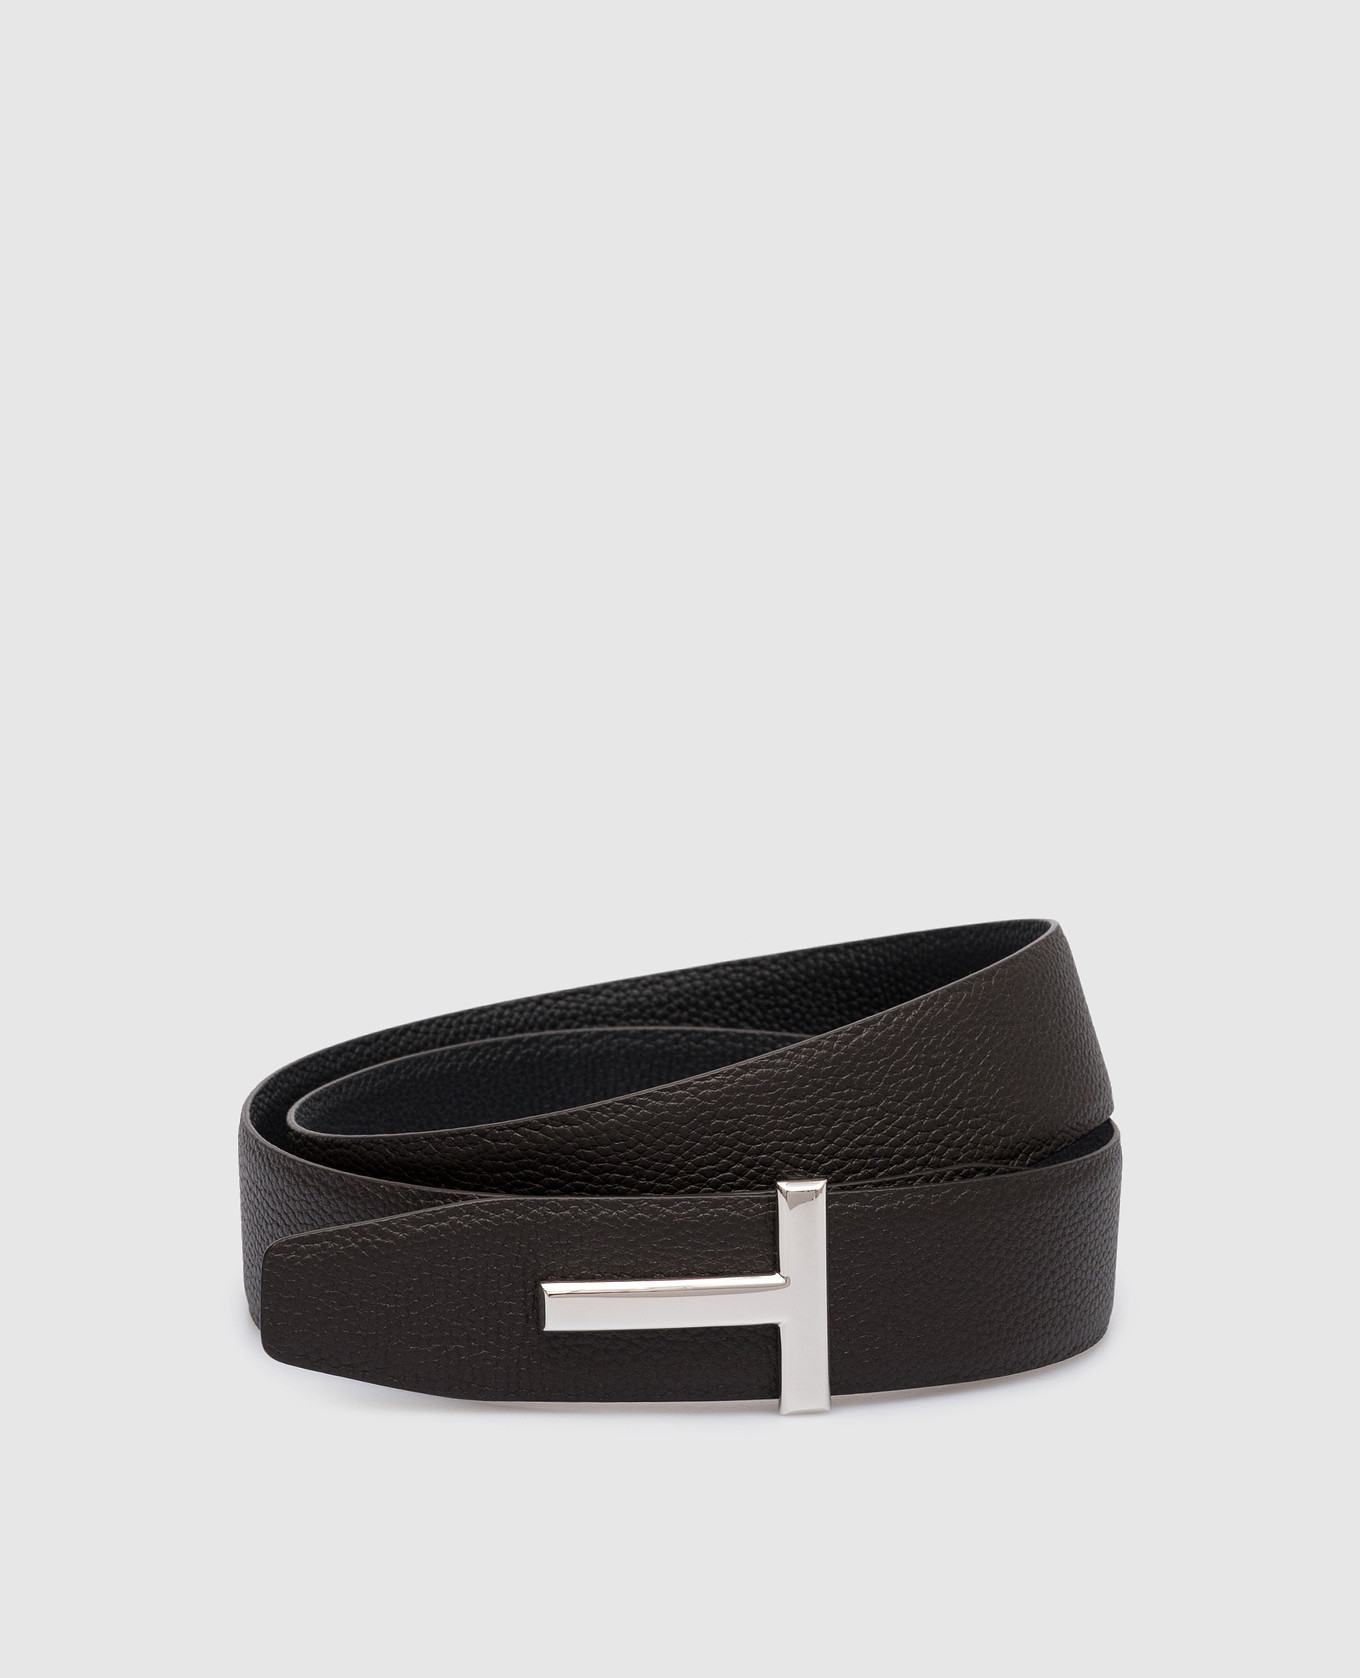 T ICON brown leather belt